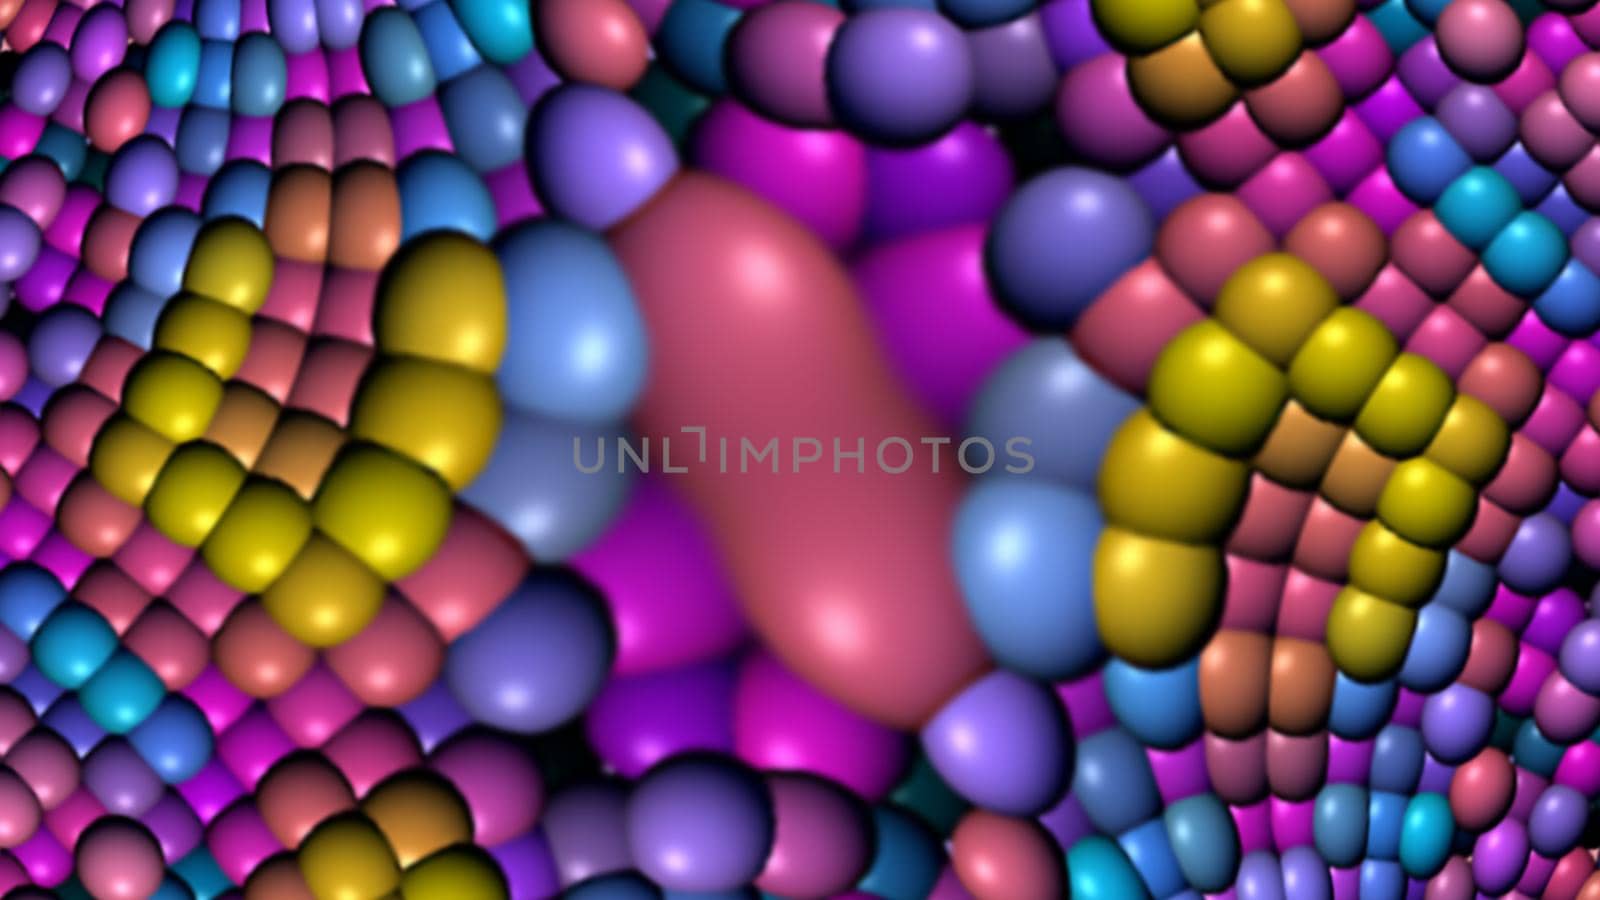 Abstract multi-colored background with a surface of spheres. 3d image